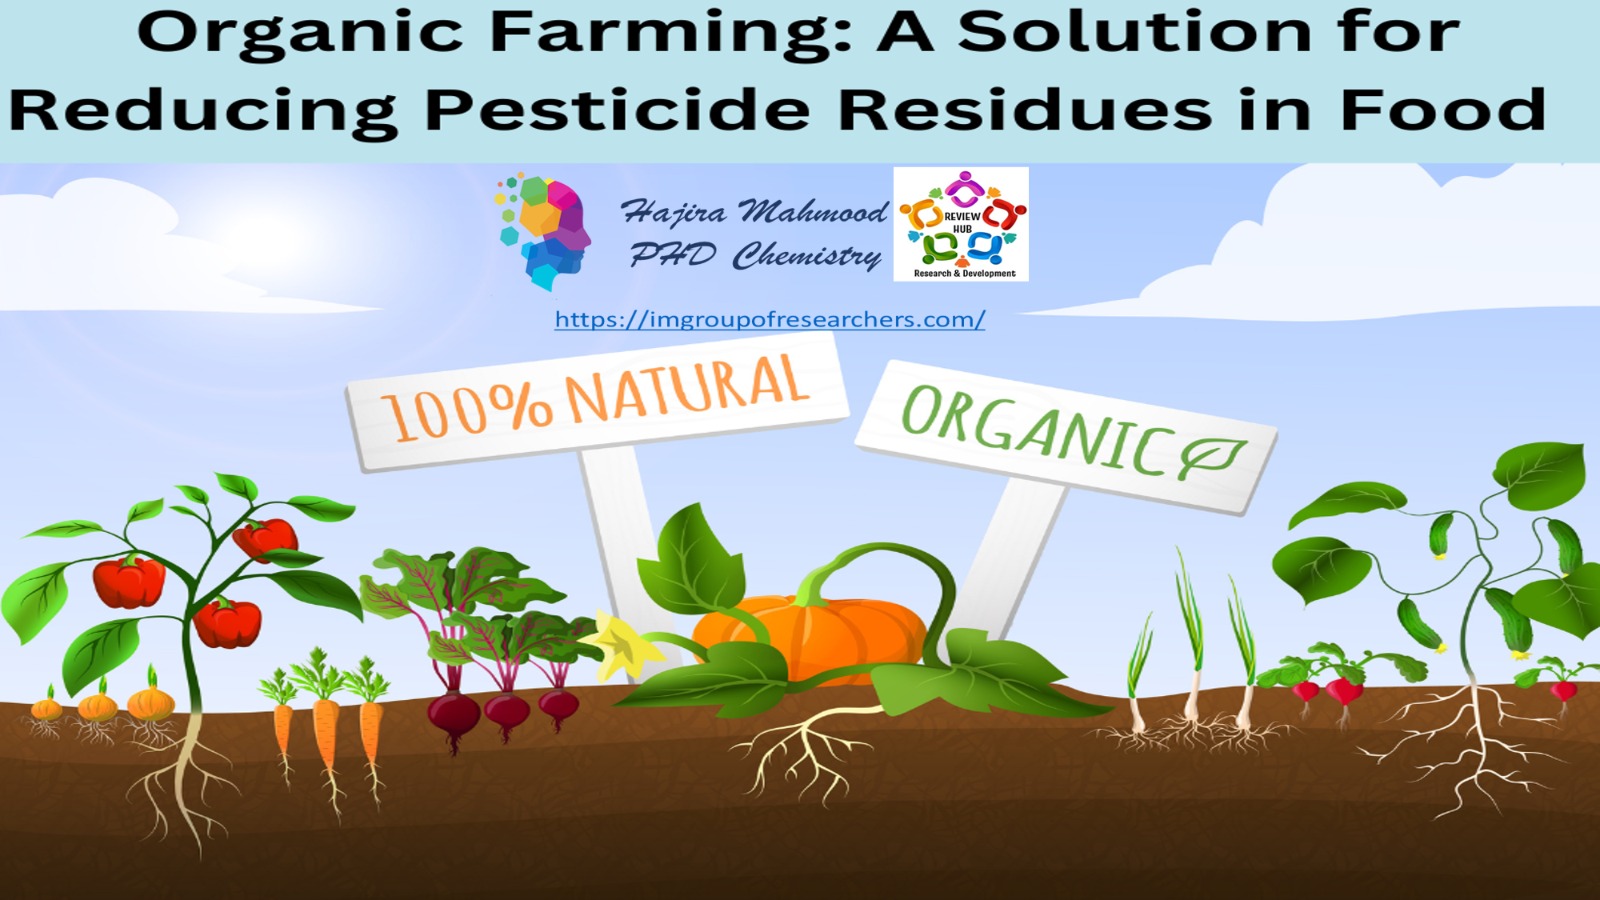 Organic Farming: A Solution for Reducing Pesticide Residues in Food